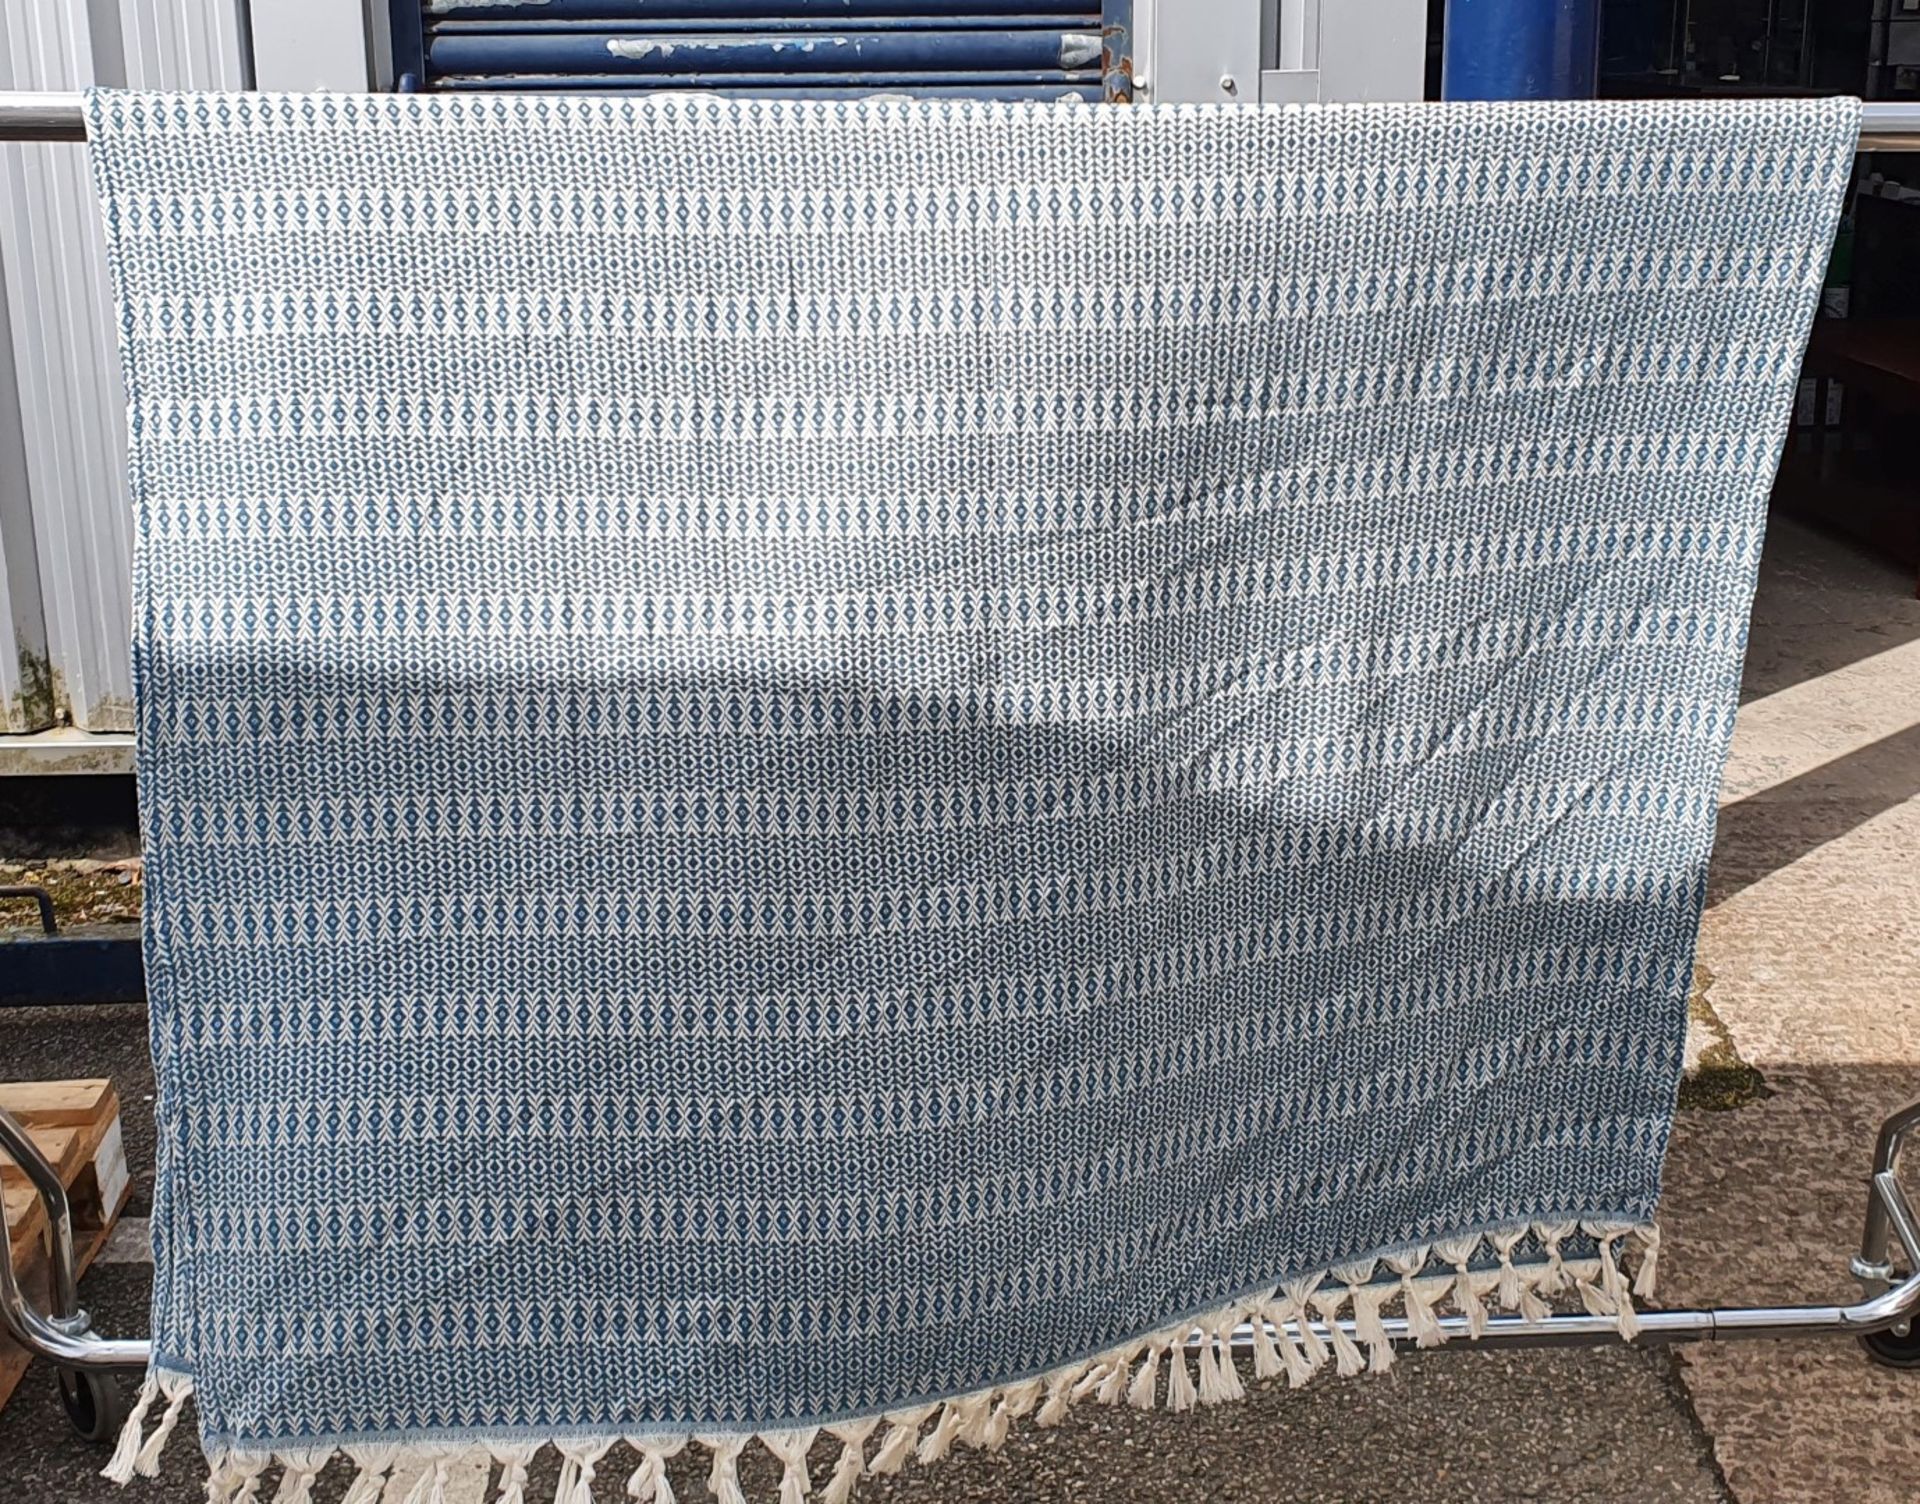 1 x Cotton & Olive Bedspread / Throw - Approx 2m in Length - New Unused Stock - Ref: TCH269A - CL840